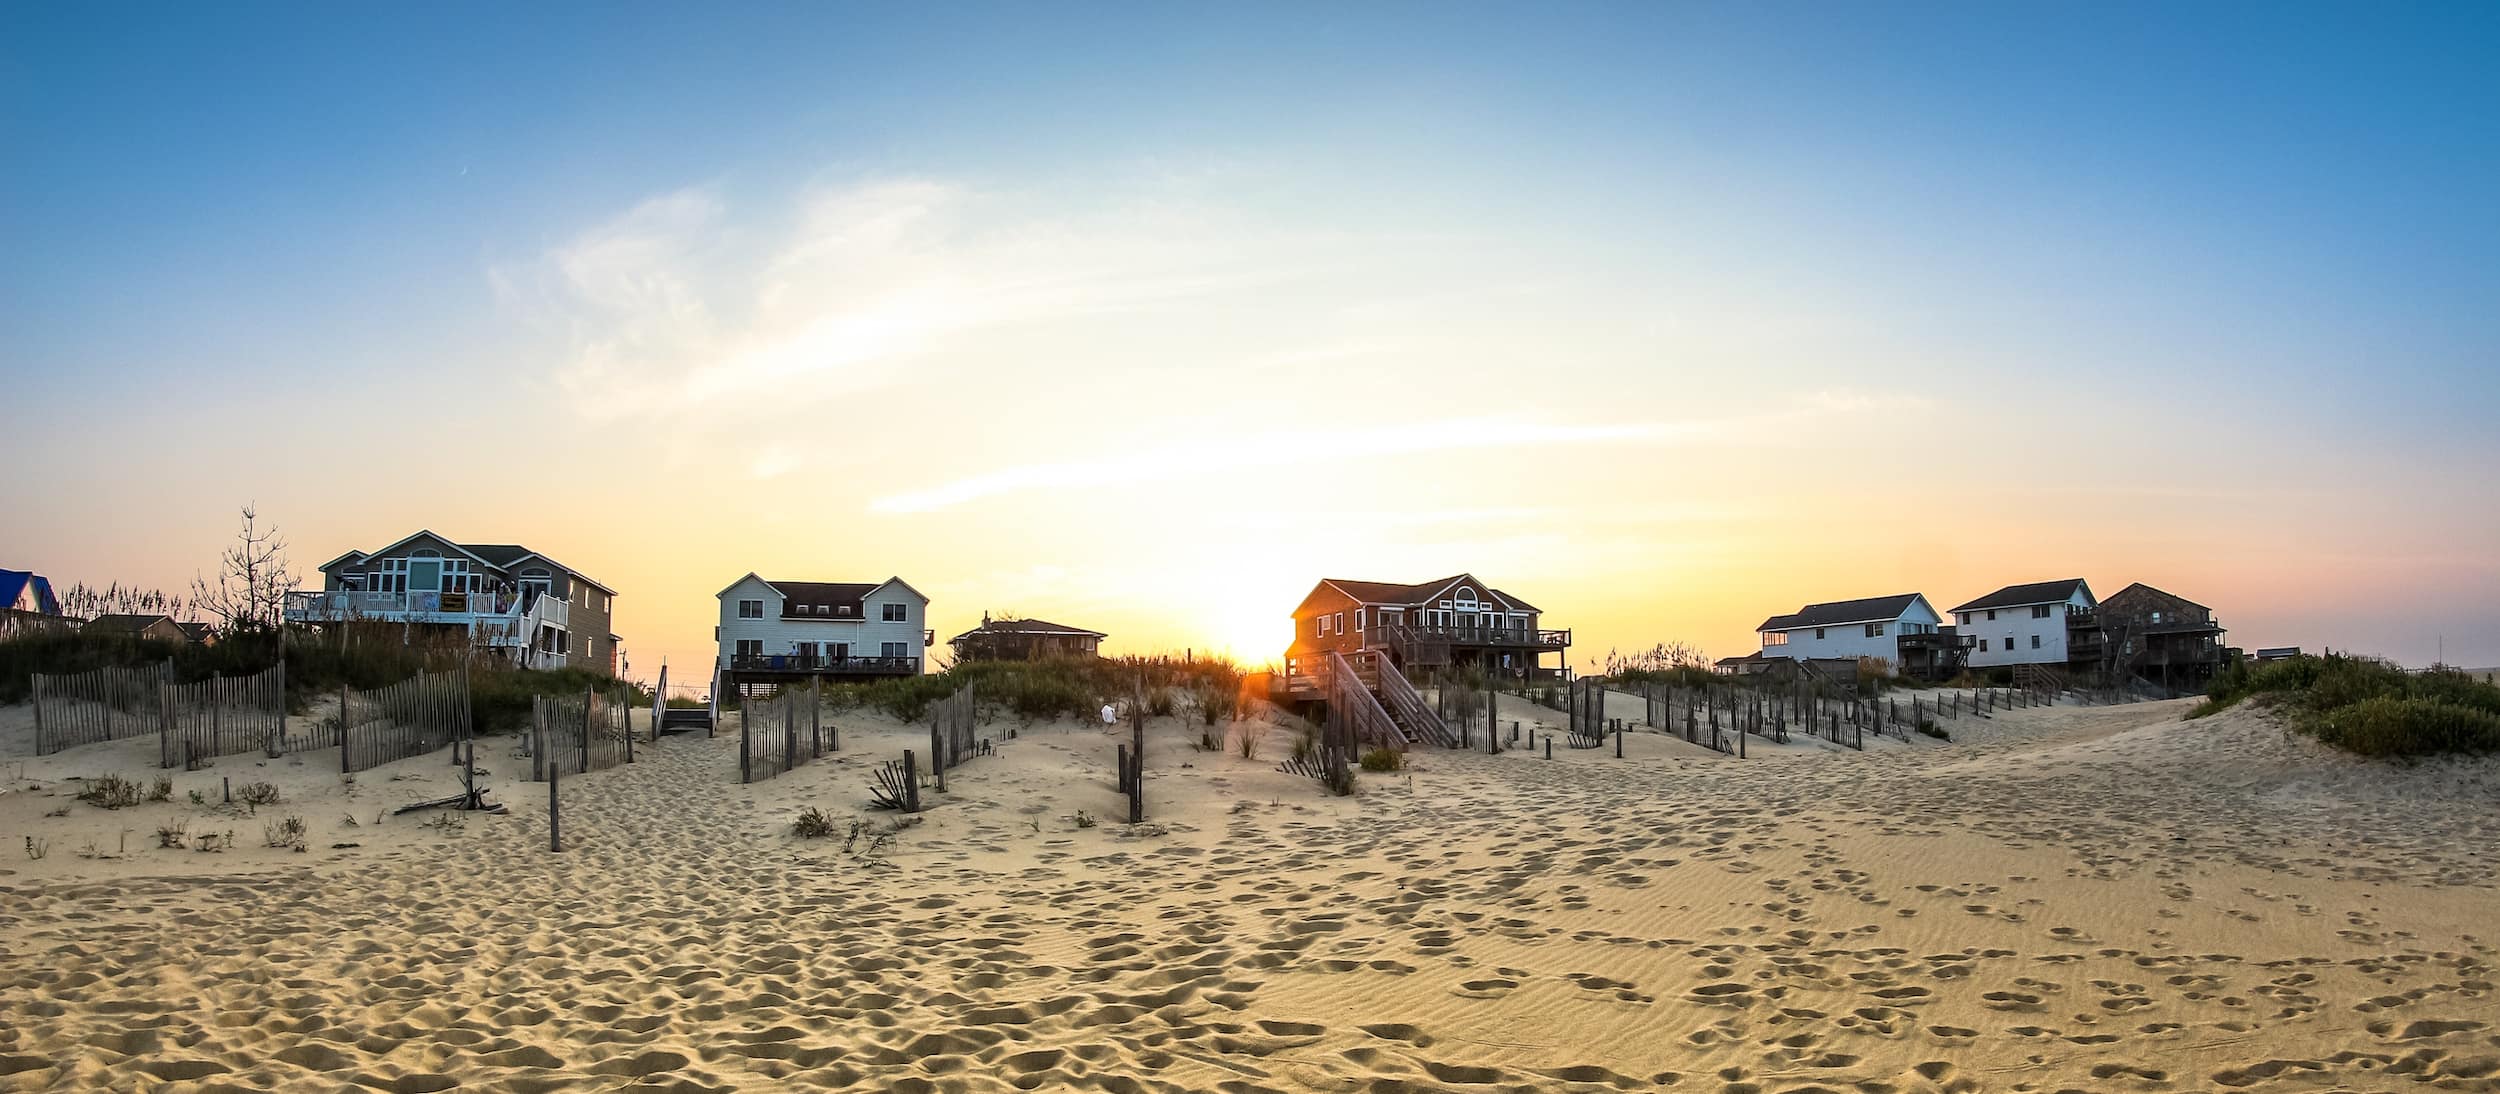 Best places to stay in the Outer Banks